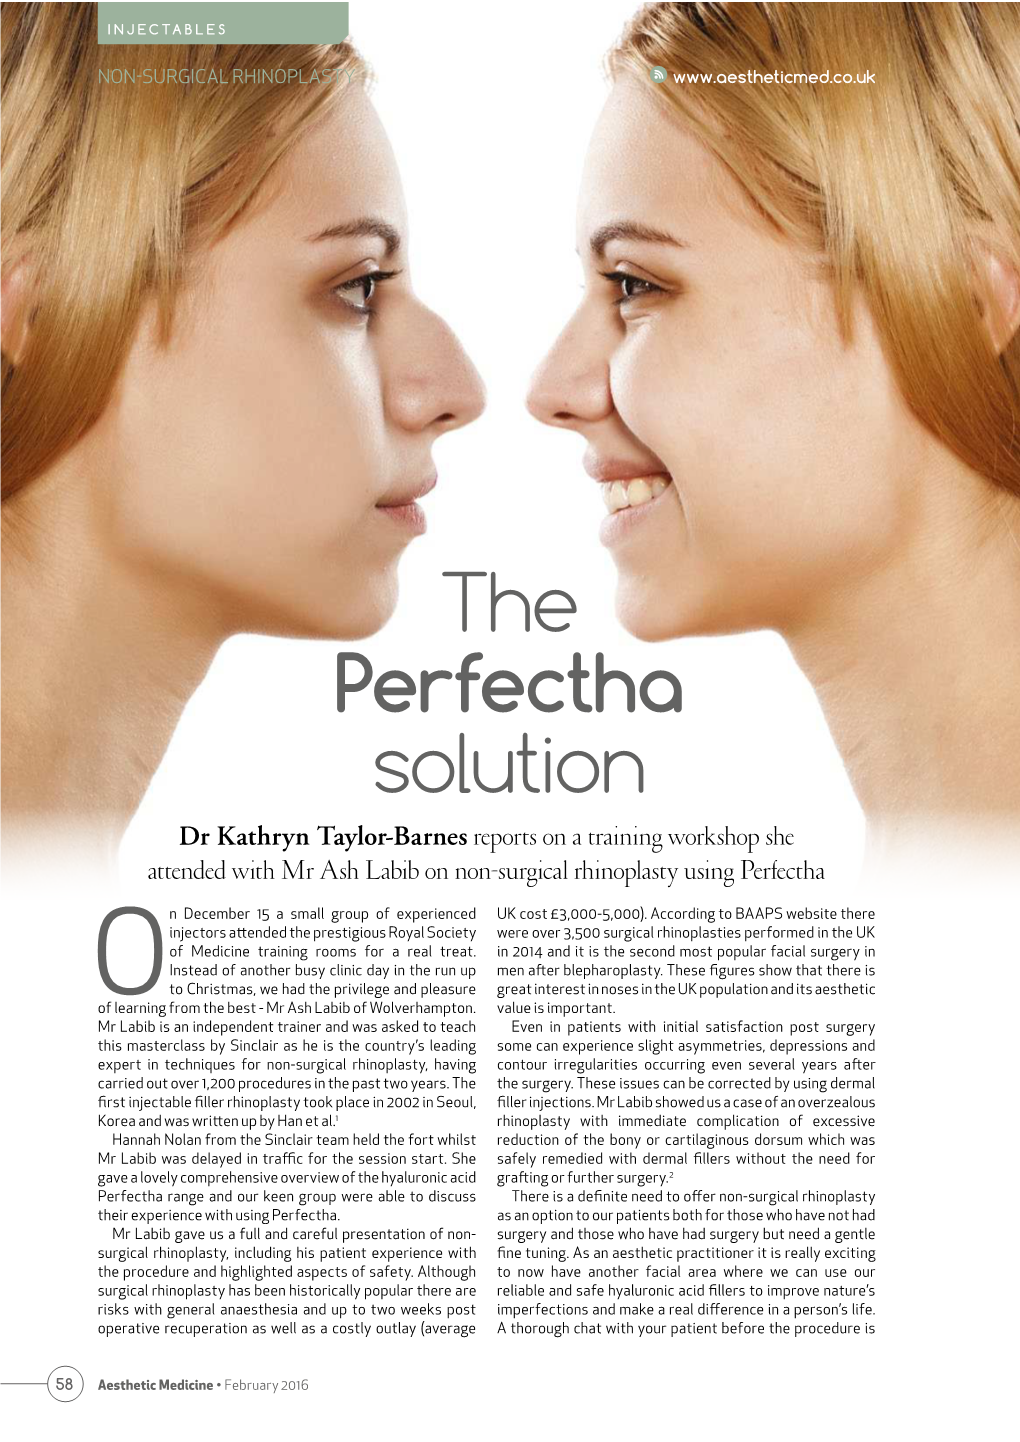 The Perfectha Solution Dr Kathryn Taylor-Barnes Reports on a Training Workshop She Attended with Mr Ash Labib on Non-Surgical Rhinoplasty Using Perfectha